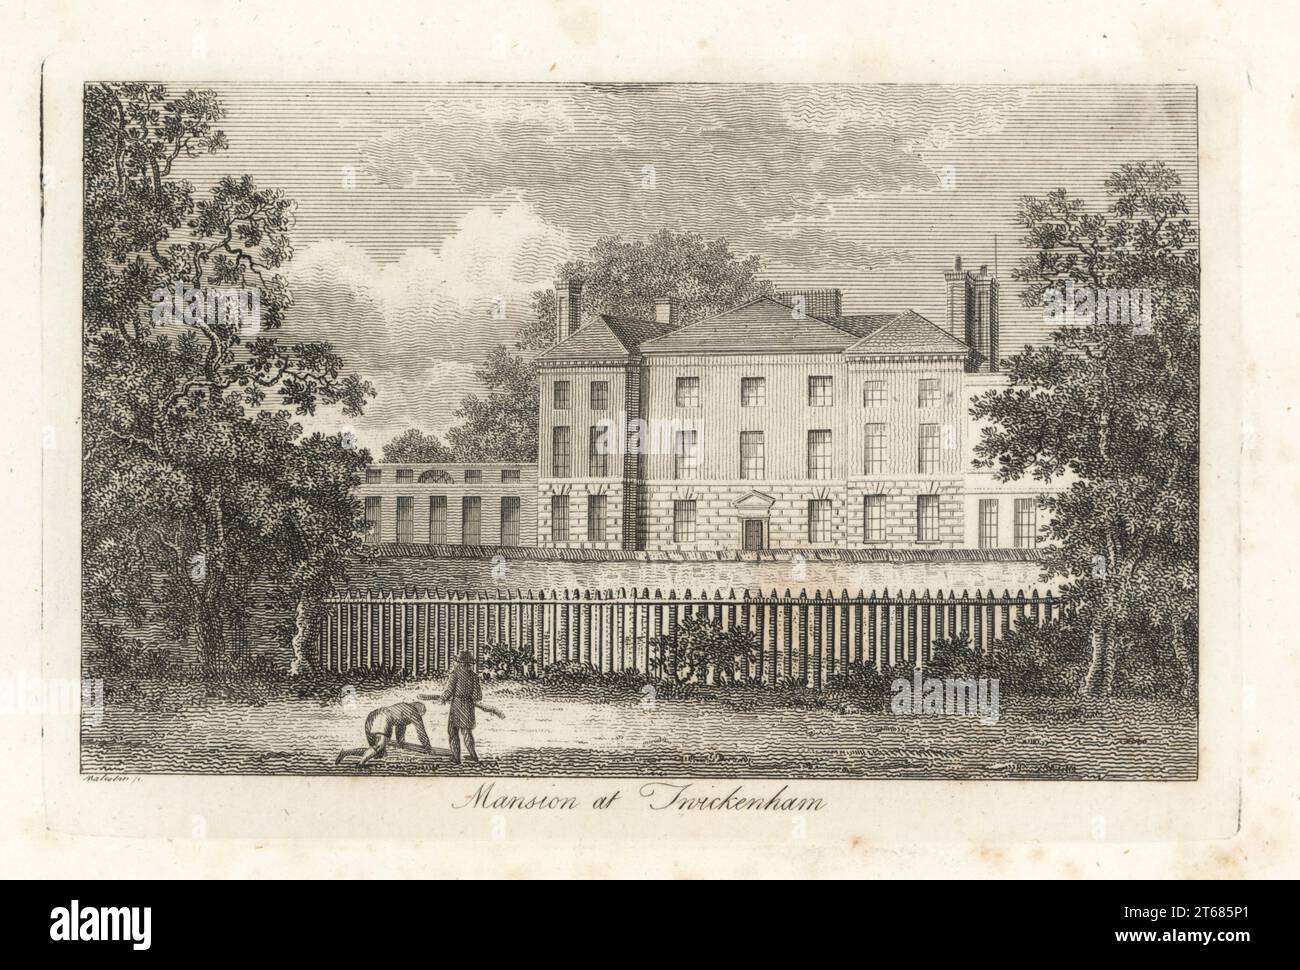 York House, Twickenham, 1807. Built for the York family and owned by Count Stahremberg in 1807. Large neo-classical villa with a pedimented entrance and an arcade extending to left, seen from a field with a wall and a picket fence and two gardeners. Copperplate drawn and engraved by James Peller Malcolm from his Anecdotes of the Manners and Customs of London during the 18th Century, Longman, Hurst, London, 1808. Malcolm (1767-1815) was an American-English topographer and engraver, Fellow of the Society of Antiquaries. Stock Photo